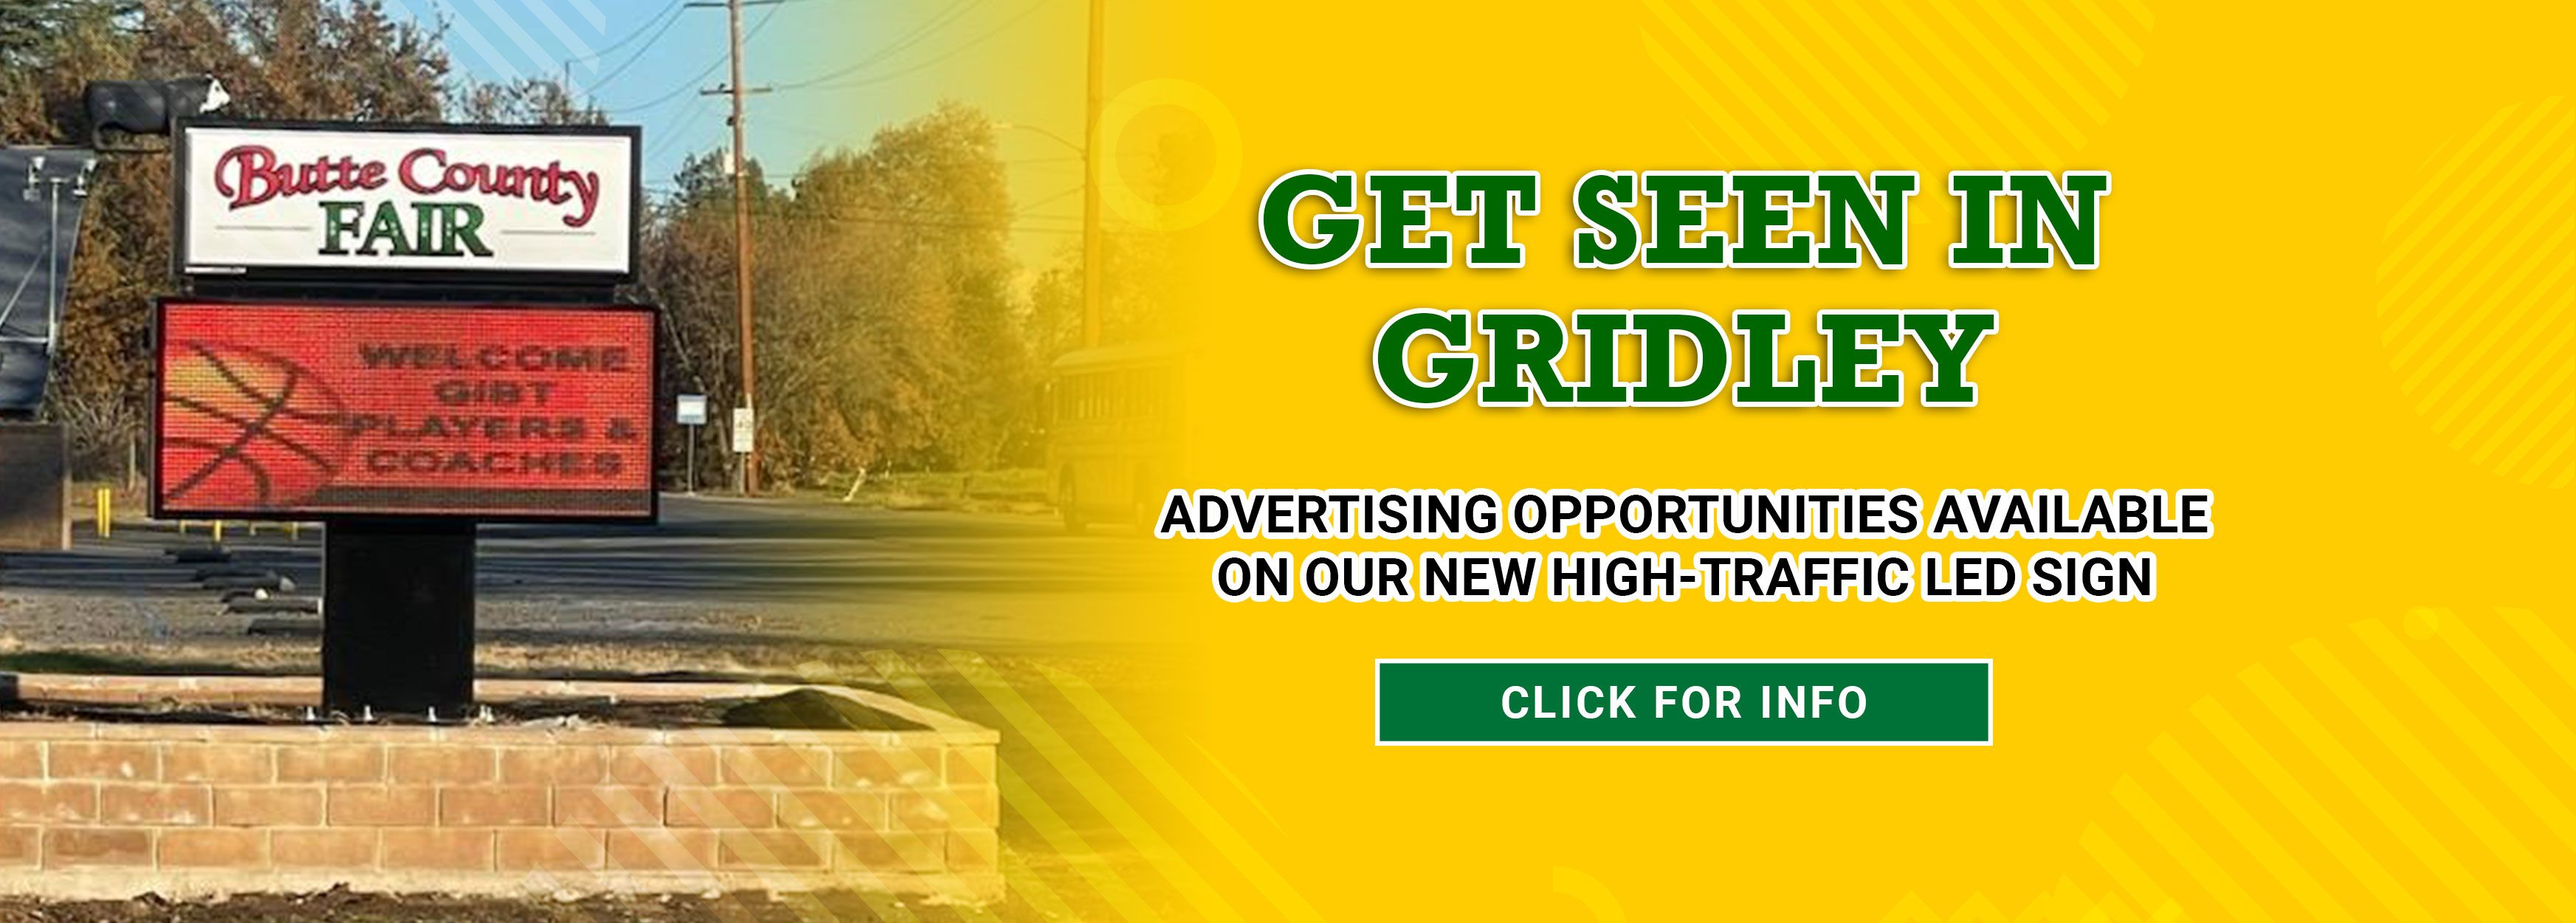 LED Advertising Opportunities in Gridley, CA